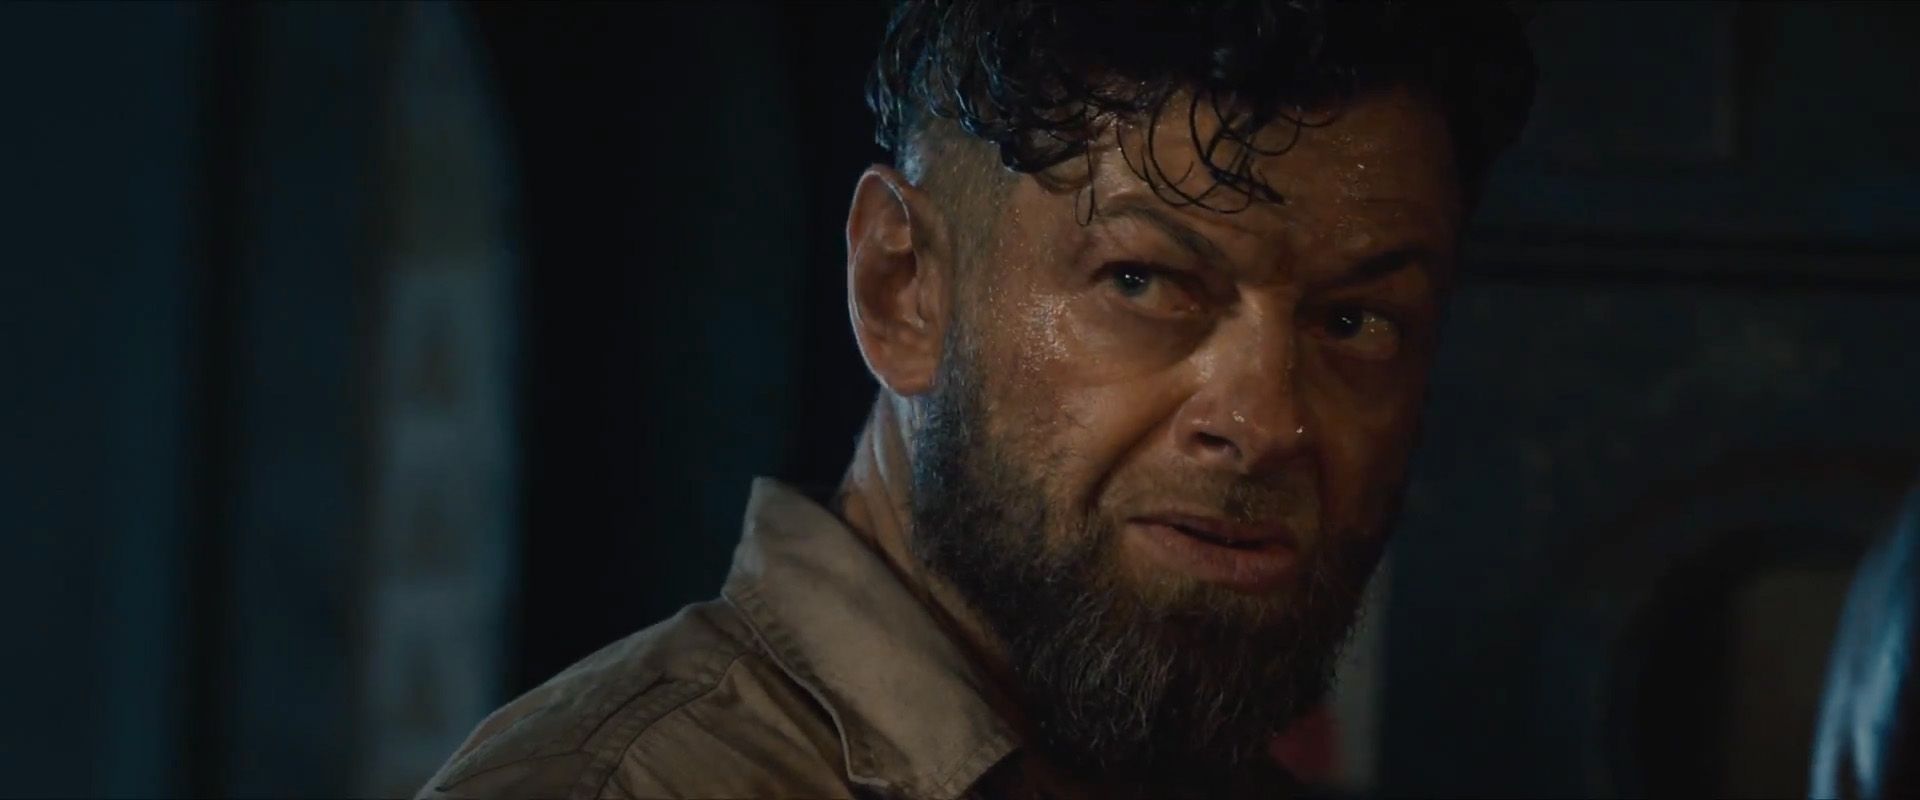 Avengers: Age of Ultron Trailer 1 - Andy Serkis